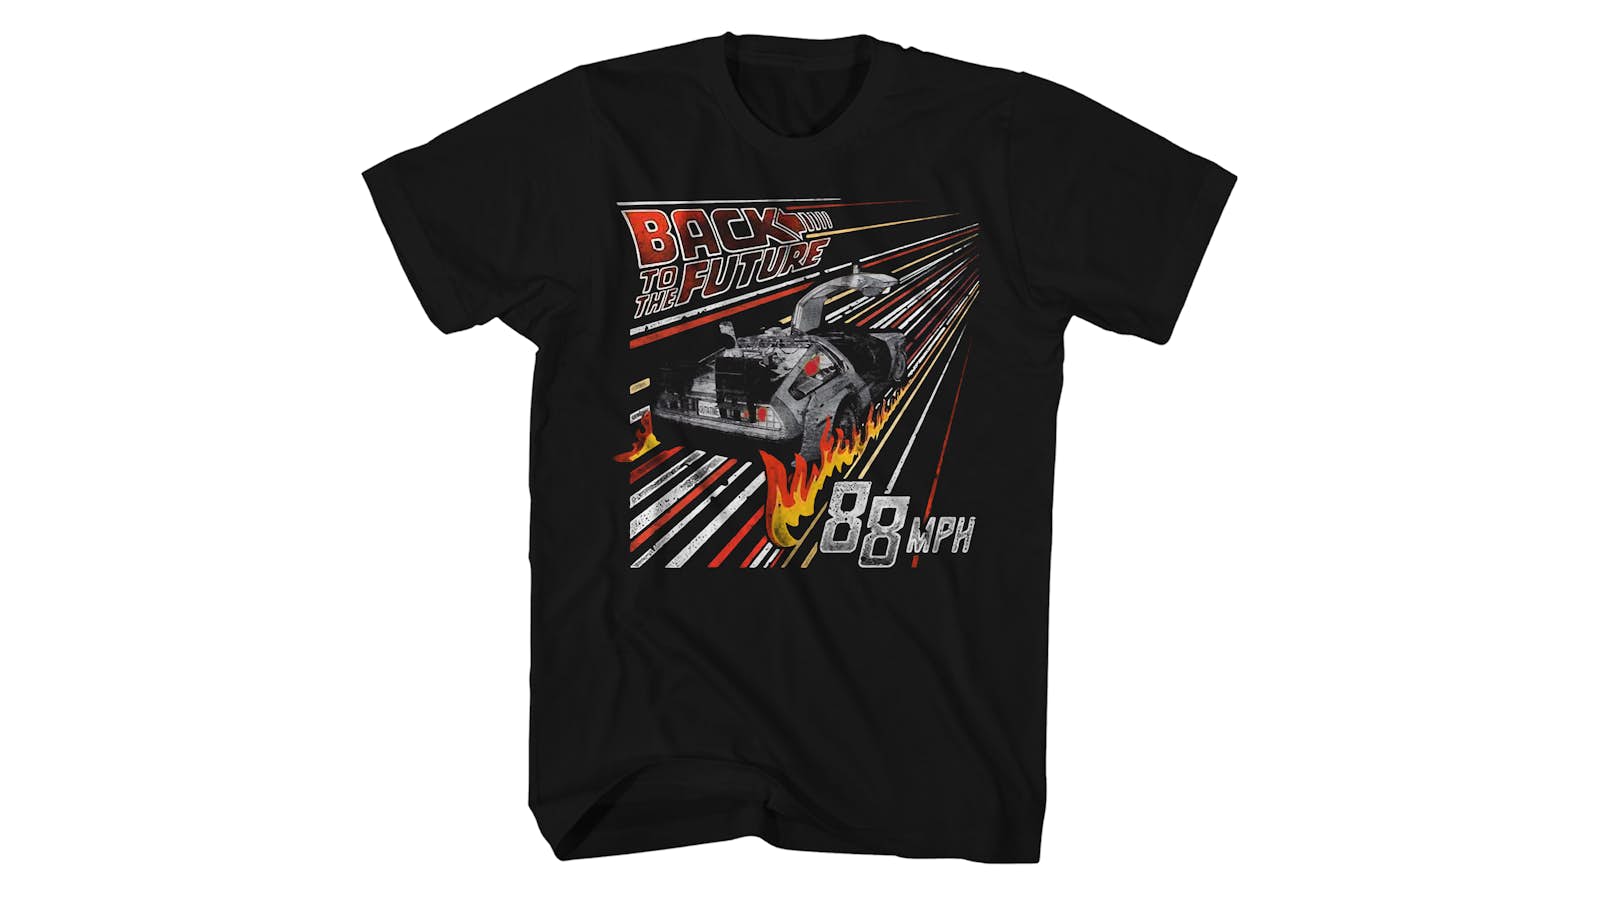 Back to the Future Inspired T-shirt 88mph Movie 80s 90s -  Canada